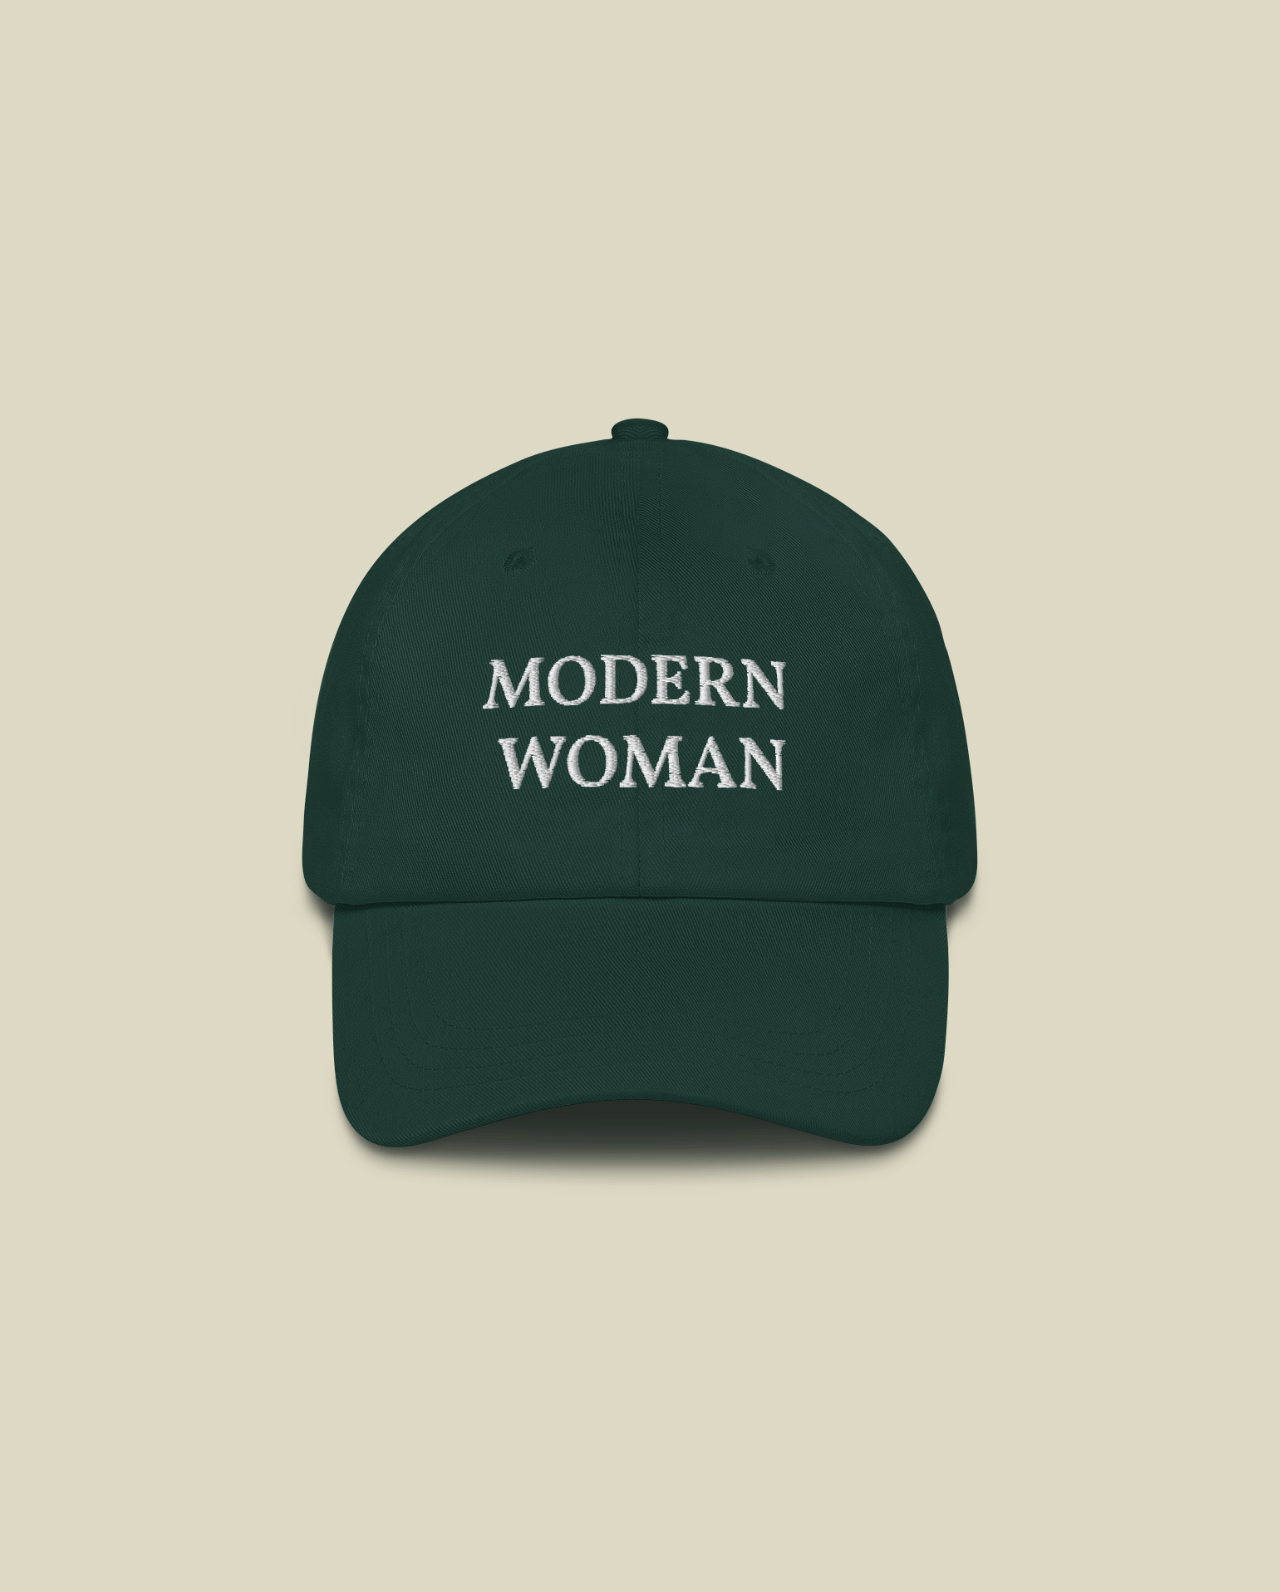 The Classic Modern Woman Hat